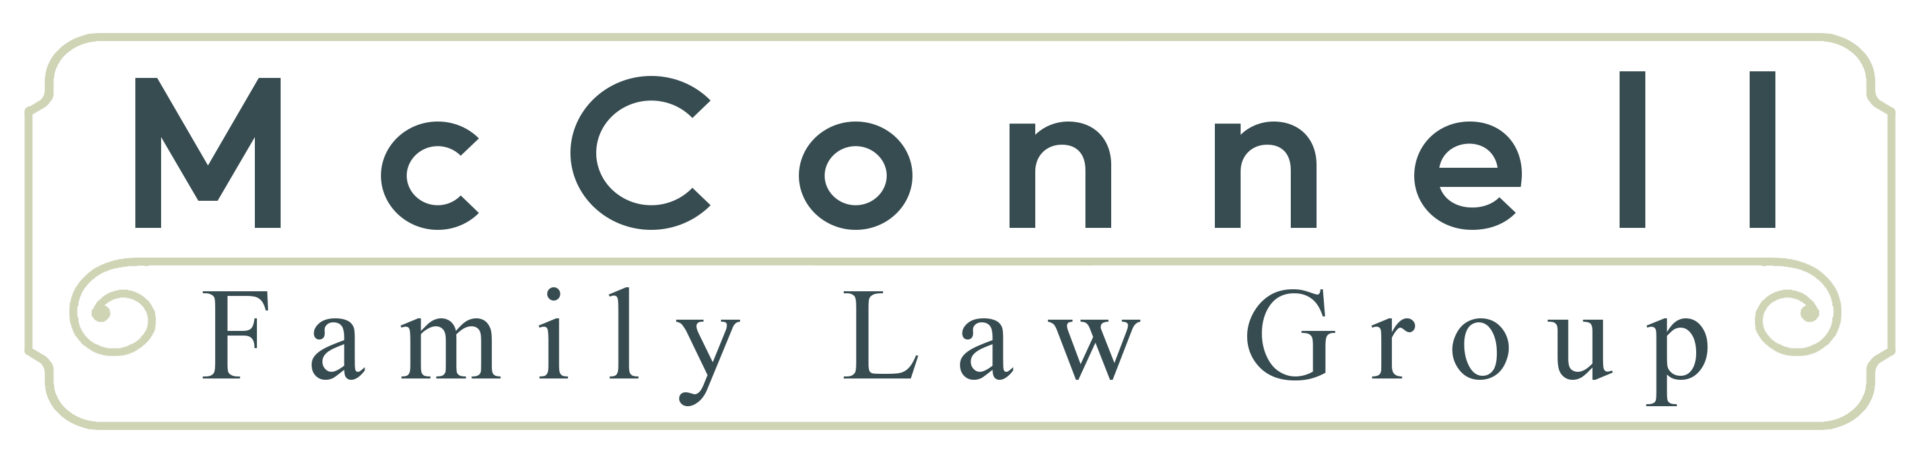 McConnell Family Law Group